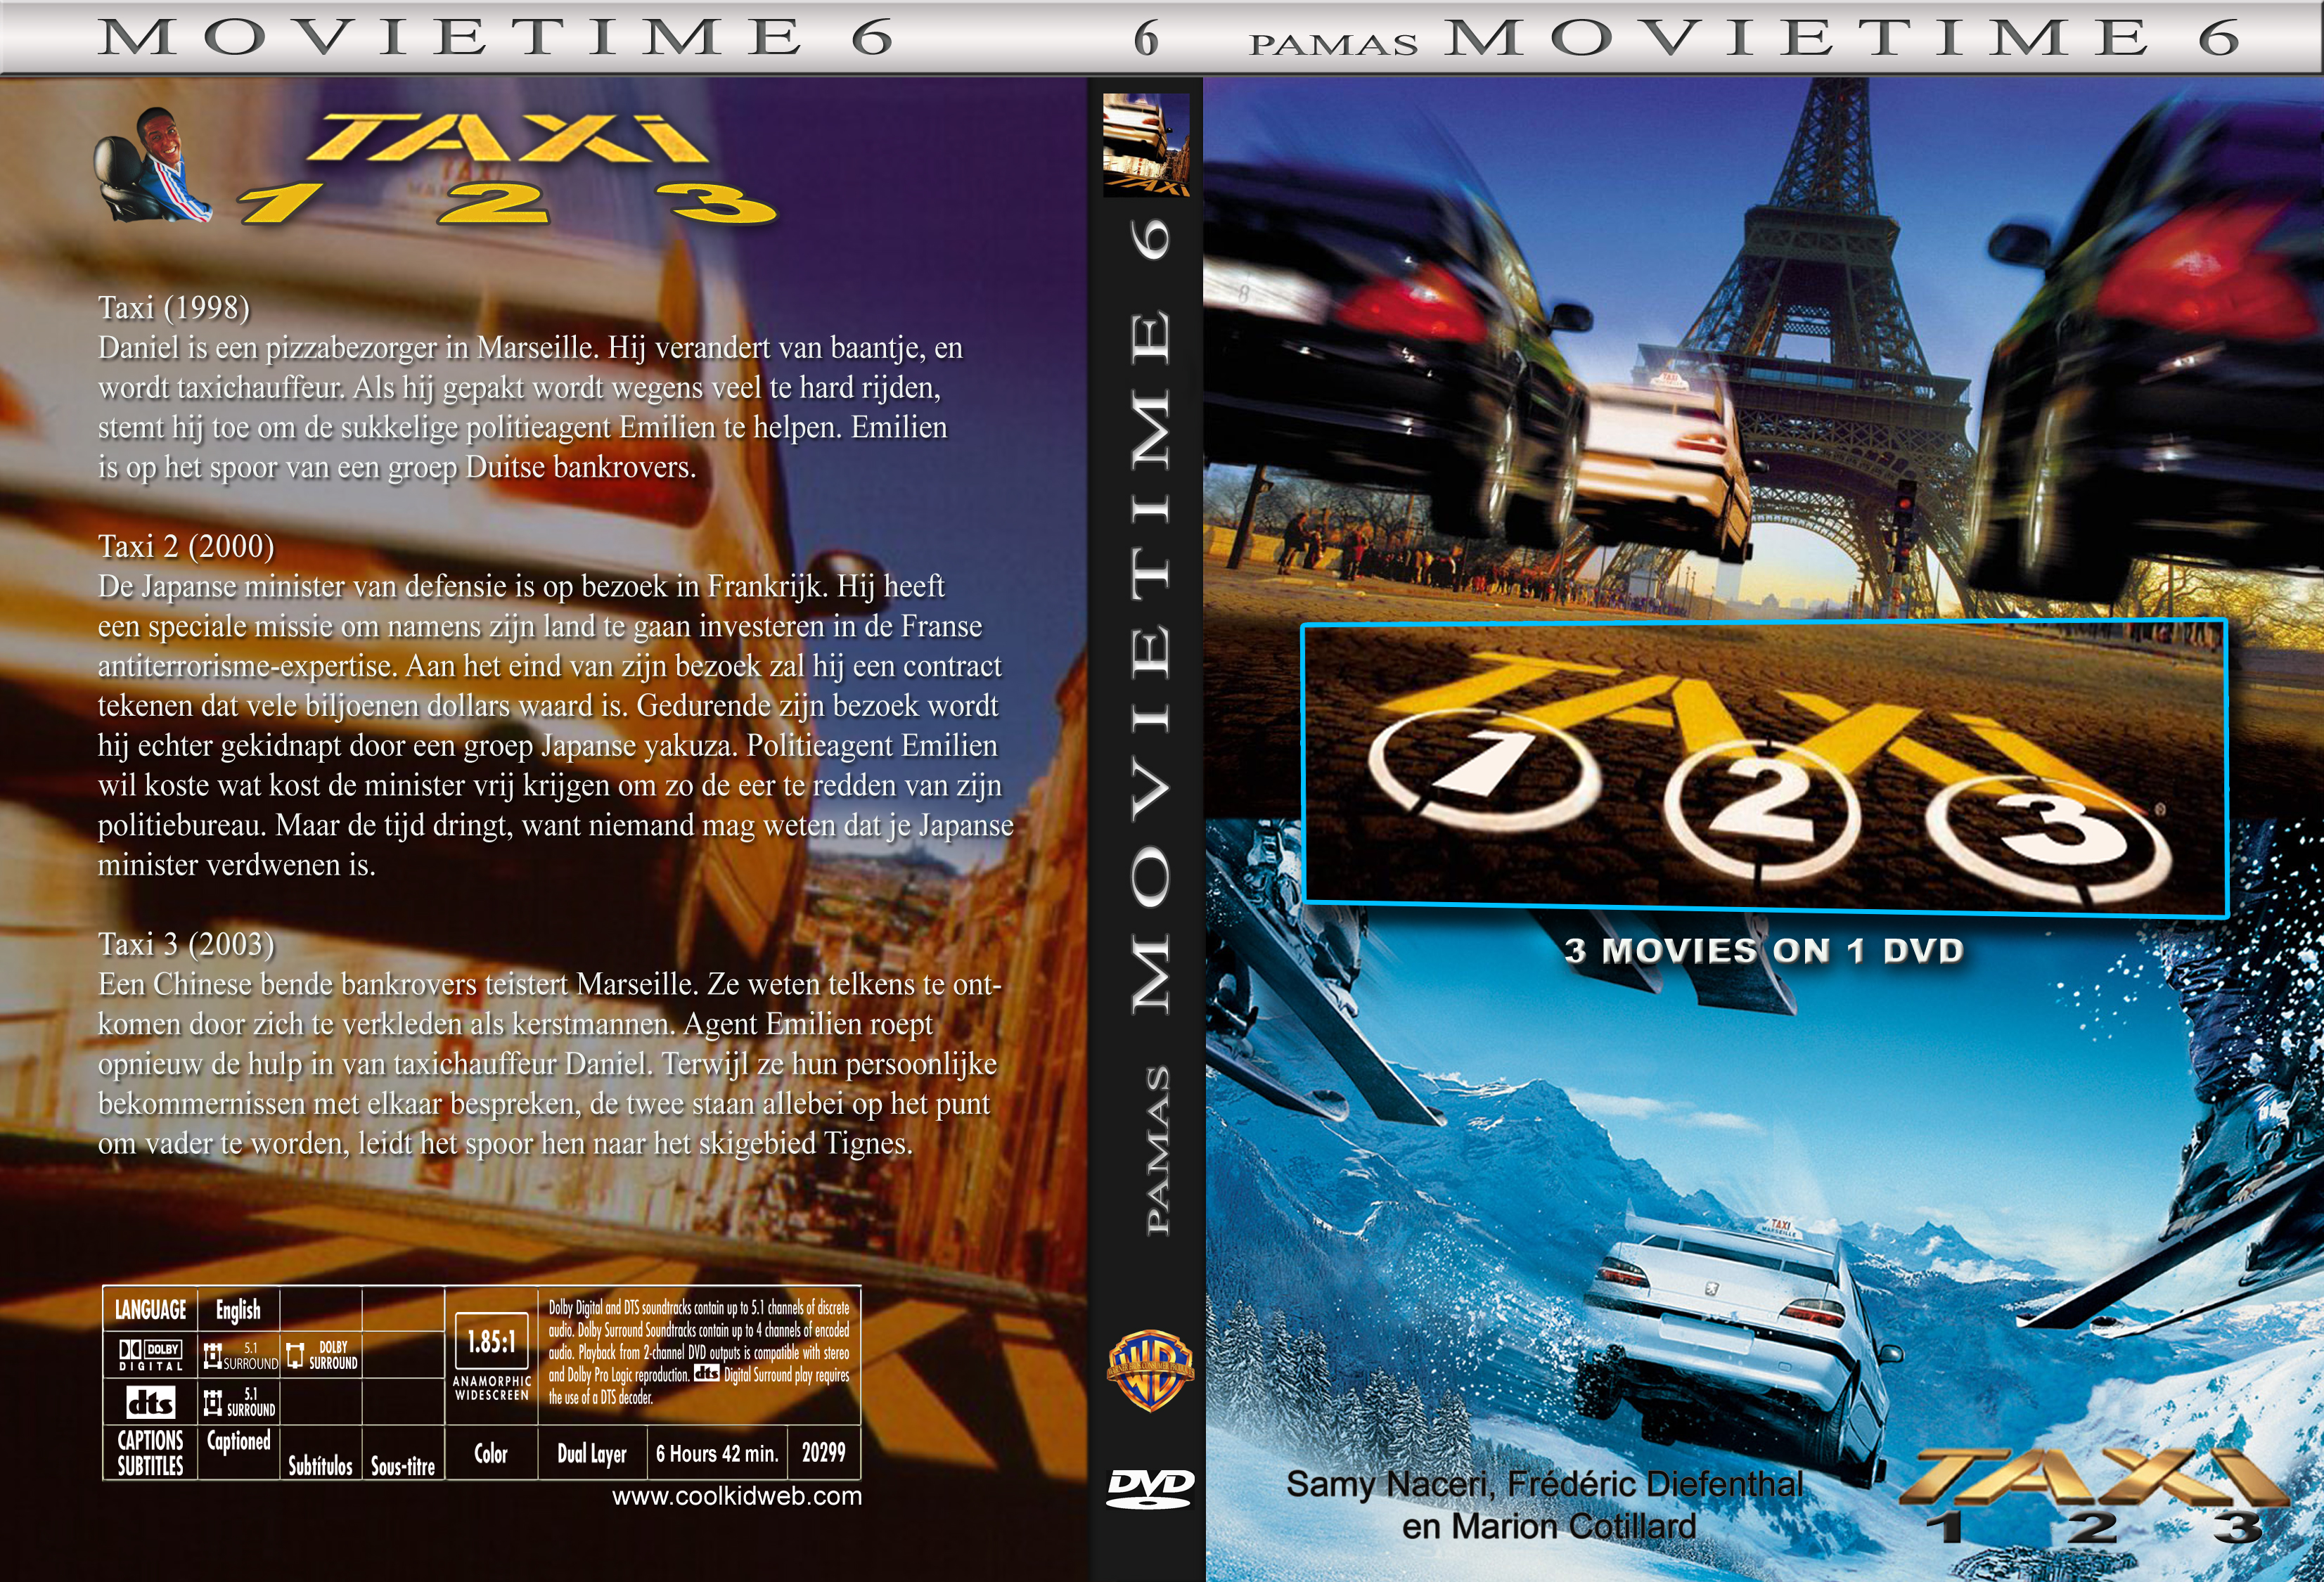 Taxi Trilogy Movietime 6 Cover